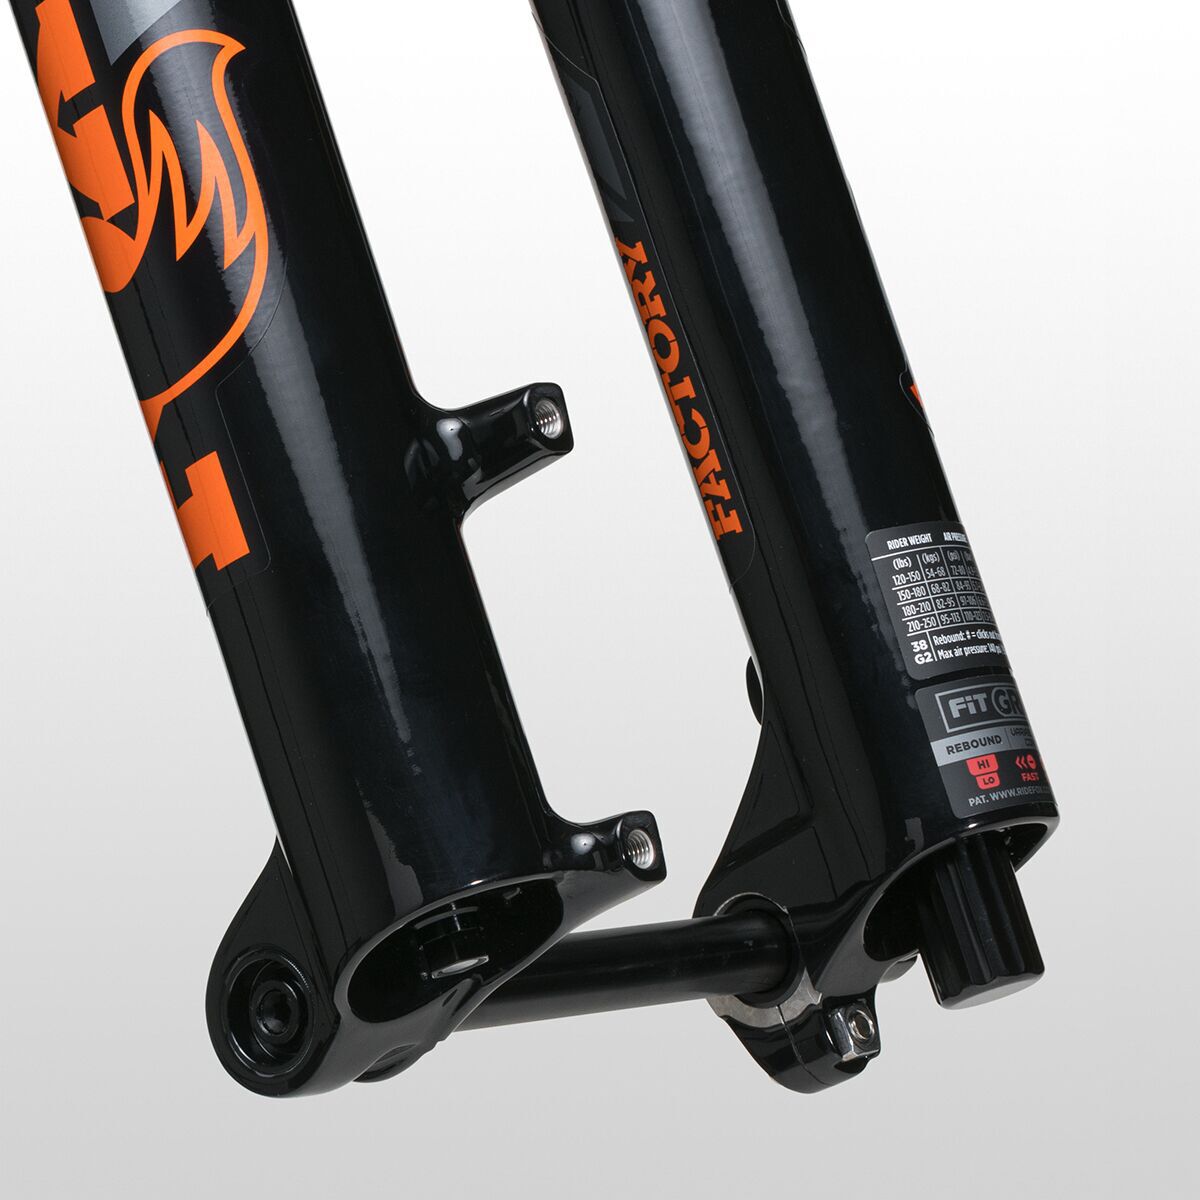 FOX Racing Shox 38 Float 29 Grip 2 Factory Boost Fork - Components